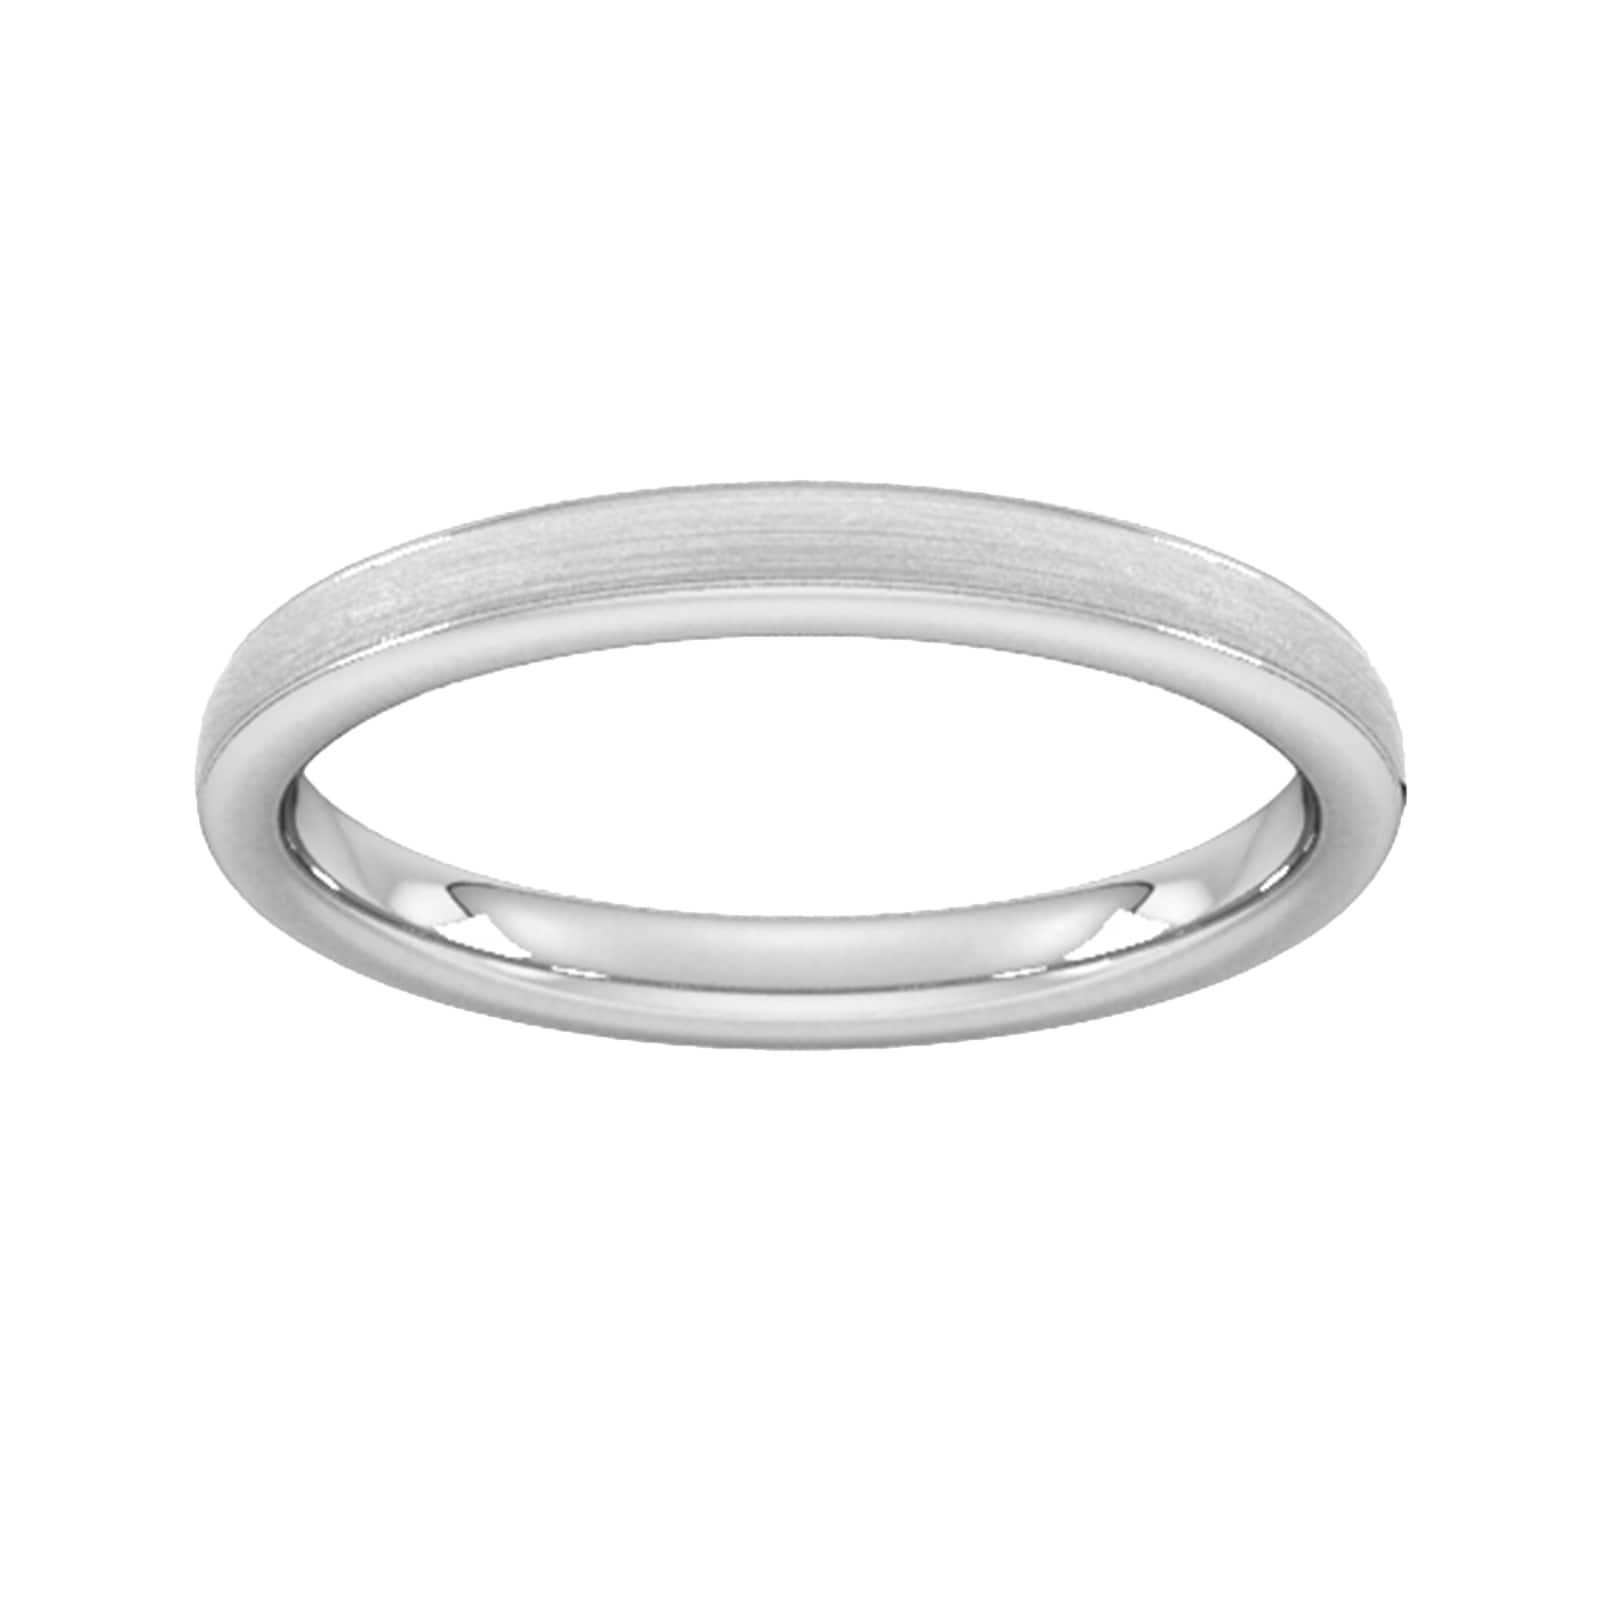 2.5mm Slight Court Heavy Matt Centre With Grooves Wedding Ring In 9 Carat White Gold - Ring Size S